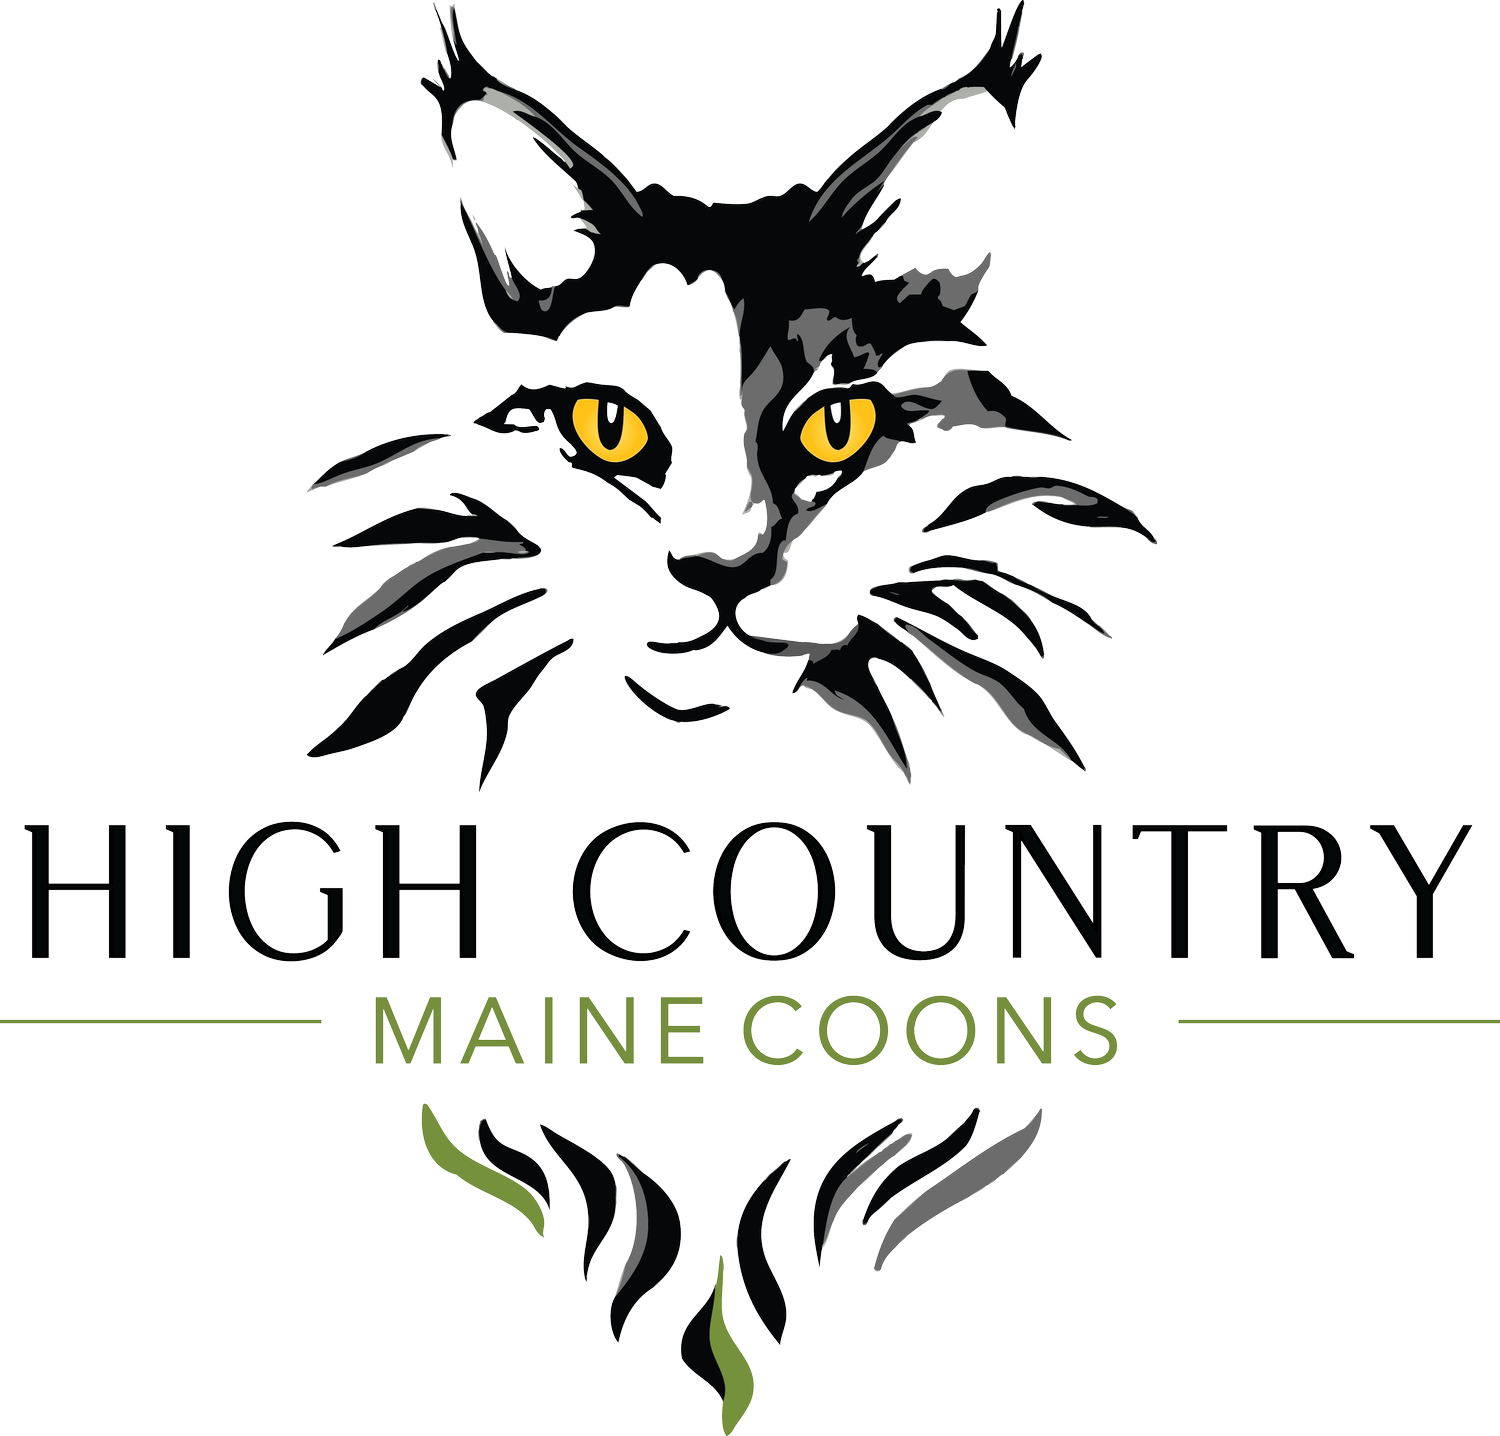 High Country Maine Coons